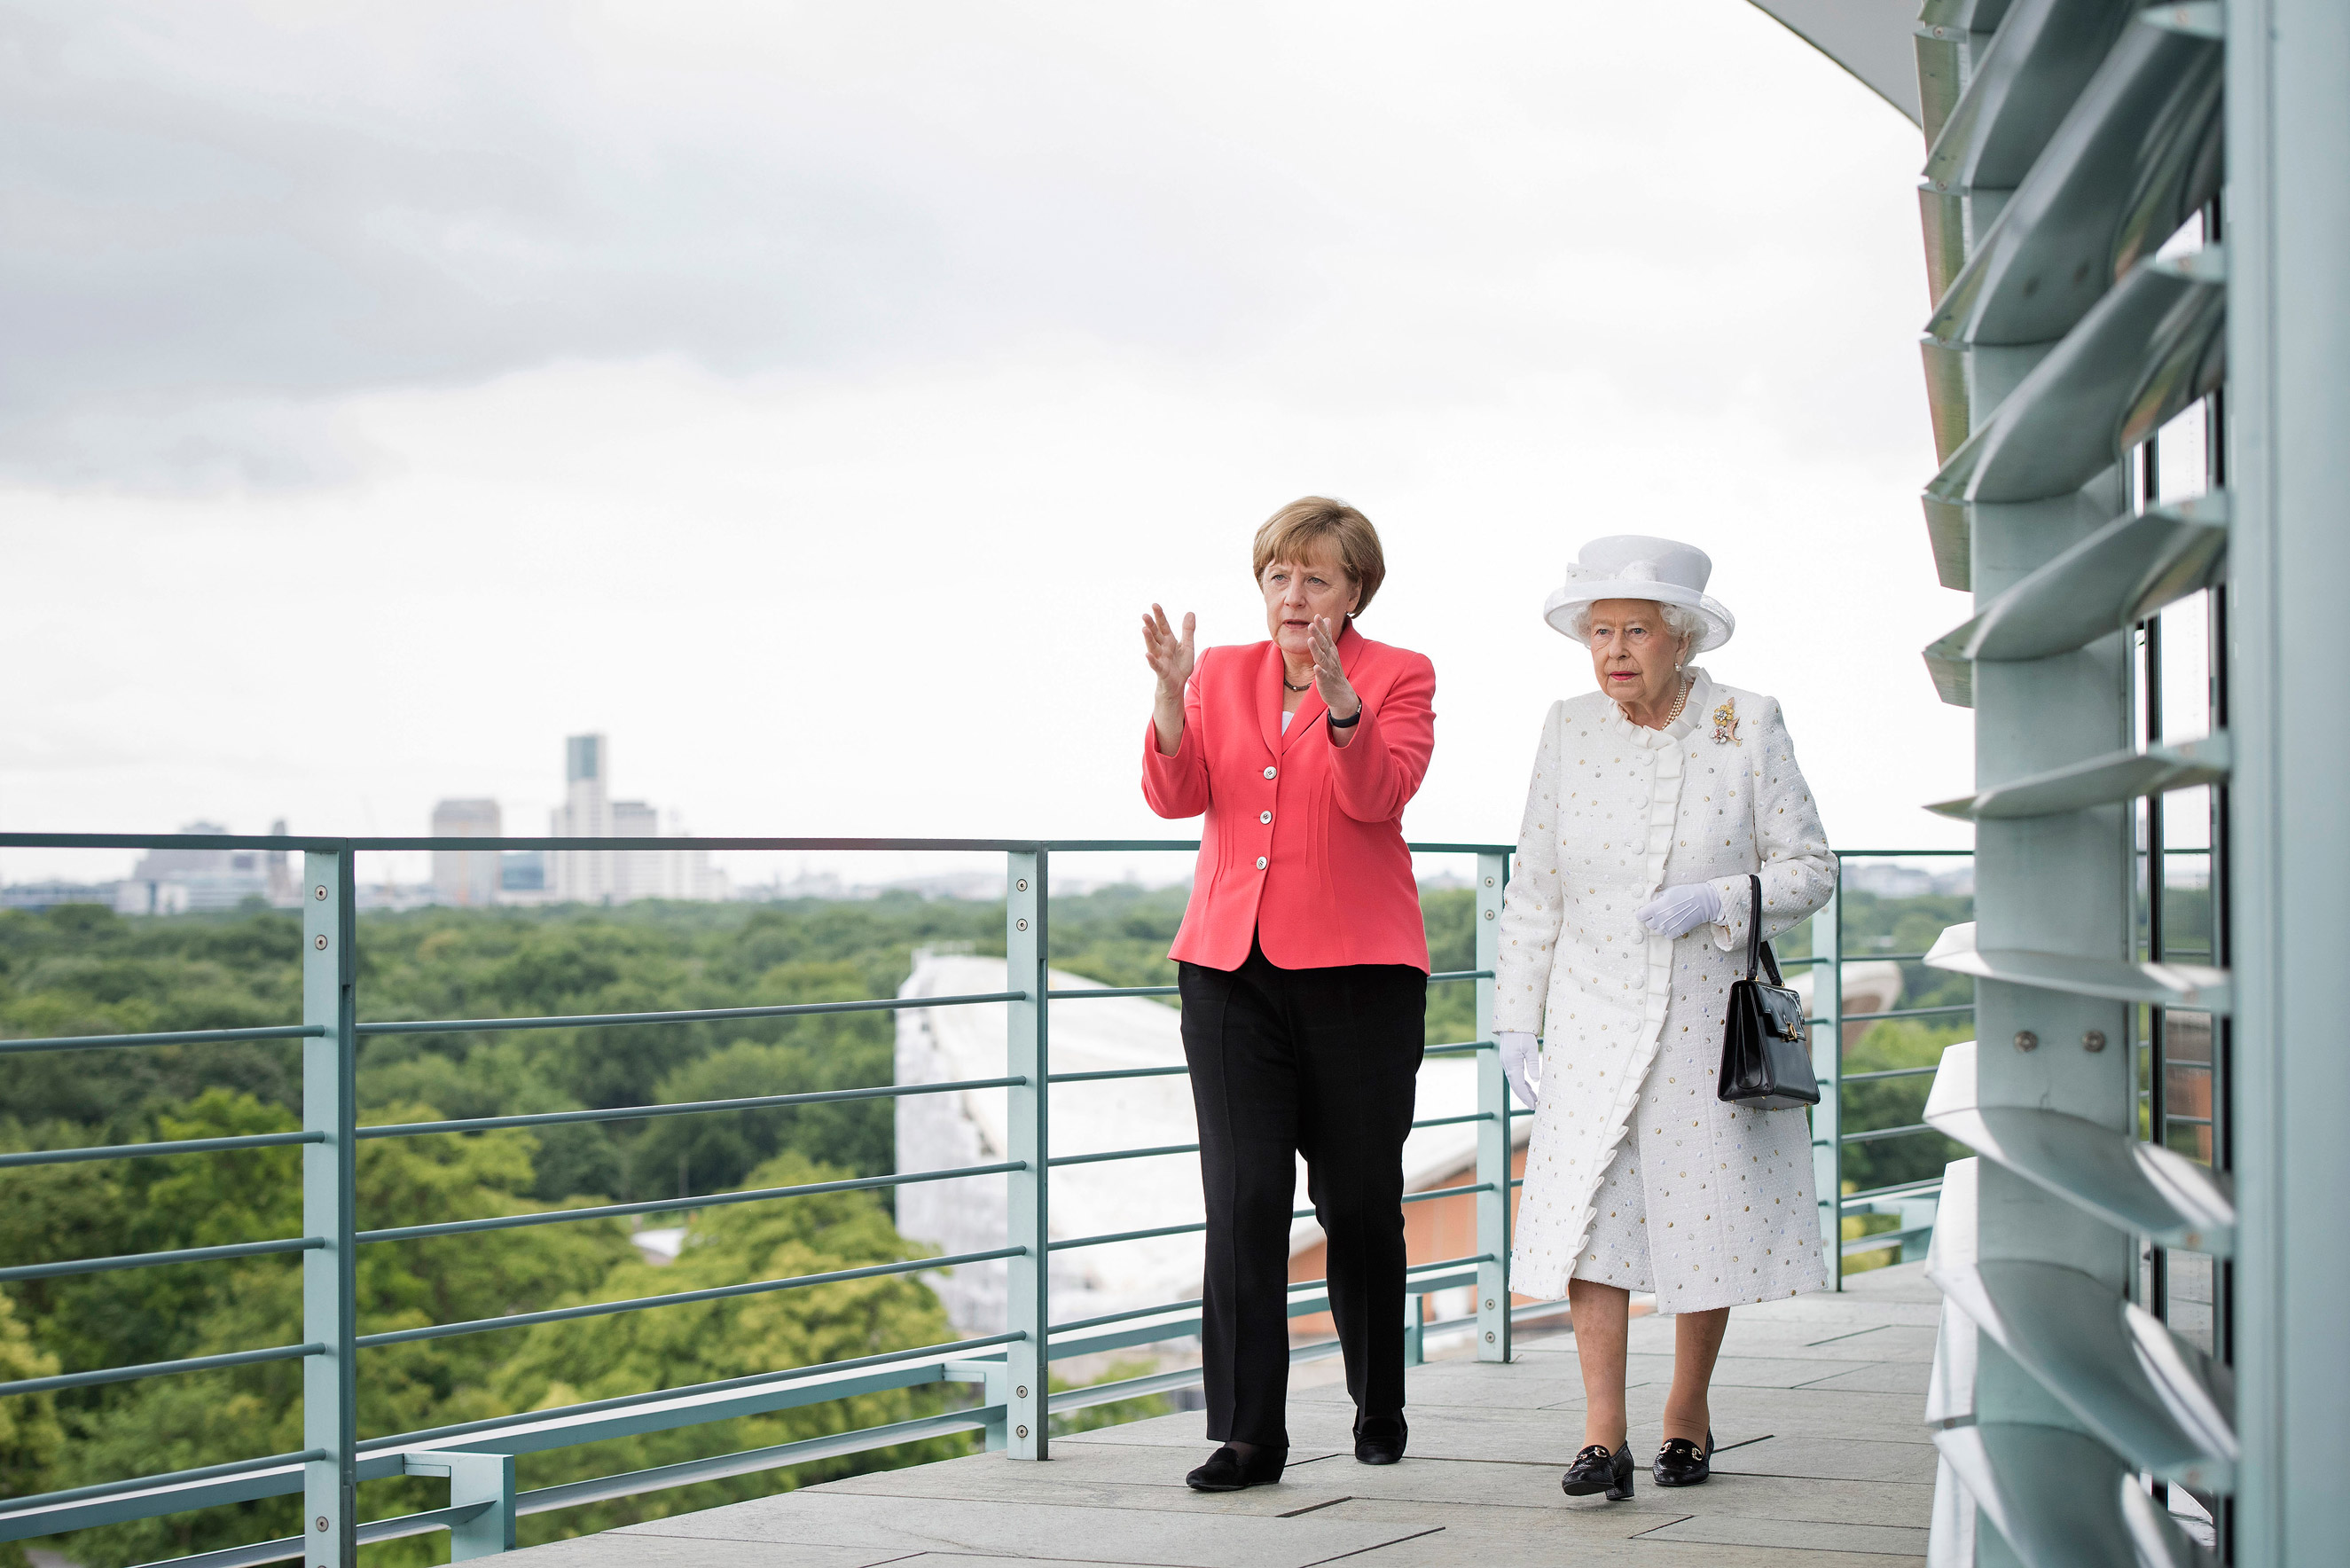 Chancellor Angela Merkel welcomes Queen Elizabeth II upon her arrival at the Federal Chancellery during the royal couple's four-day visit to Germany on June 24, 2015 in Berlin. The Queen and Prince Philip visited Berlin, Frankfurt and the concentration camp memorial at Bergen-Belsen during their first to Germany since 2004.